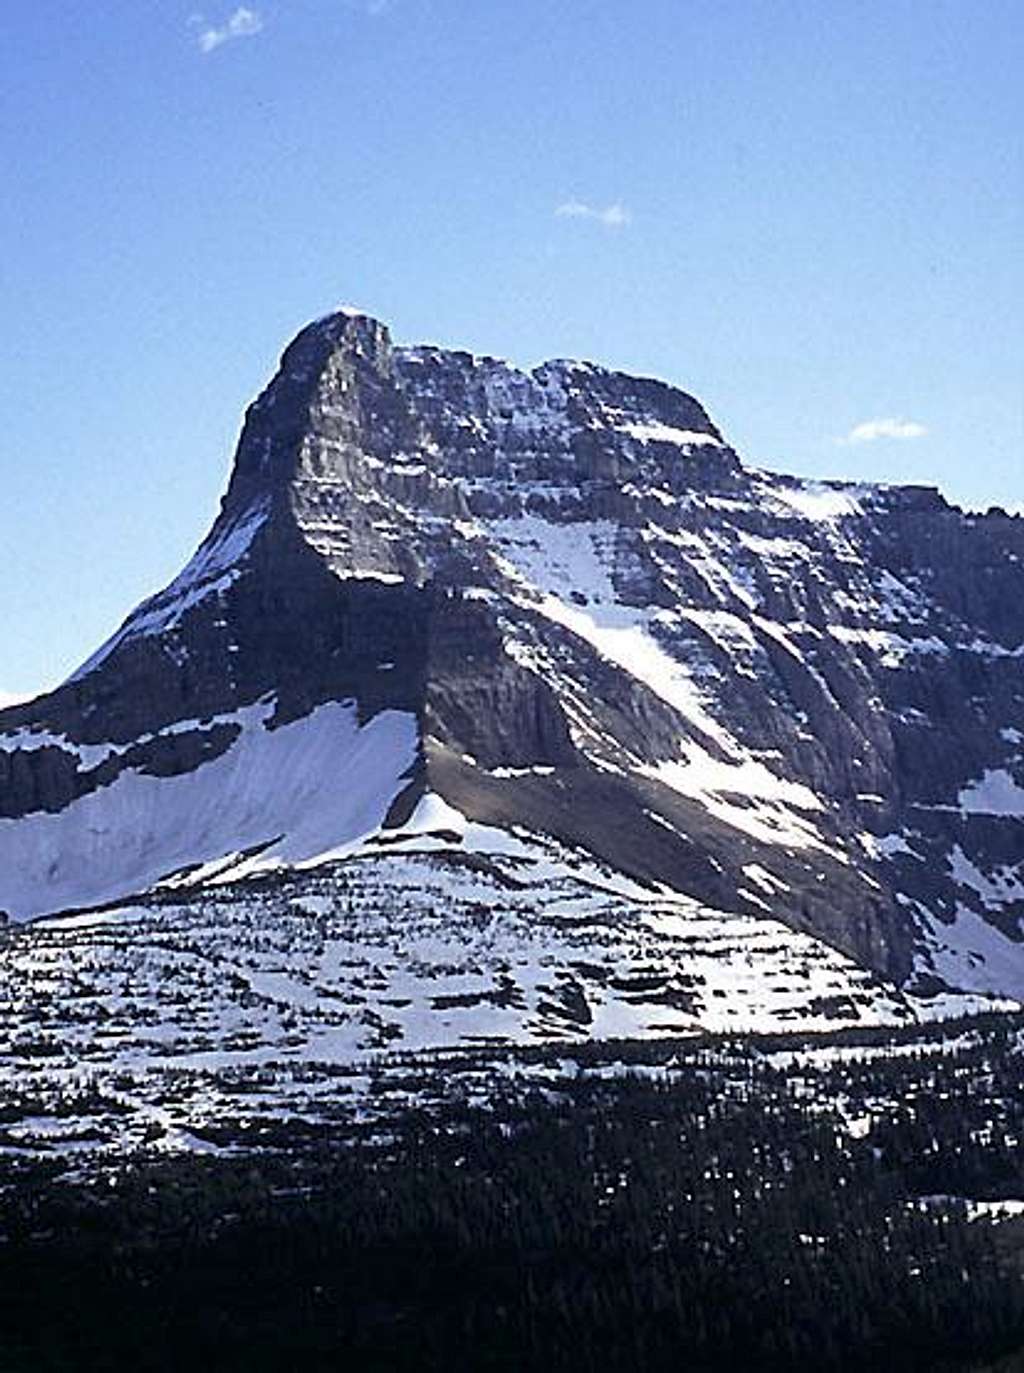 The north face of Mount Wilbur